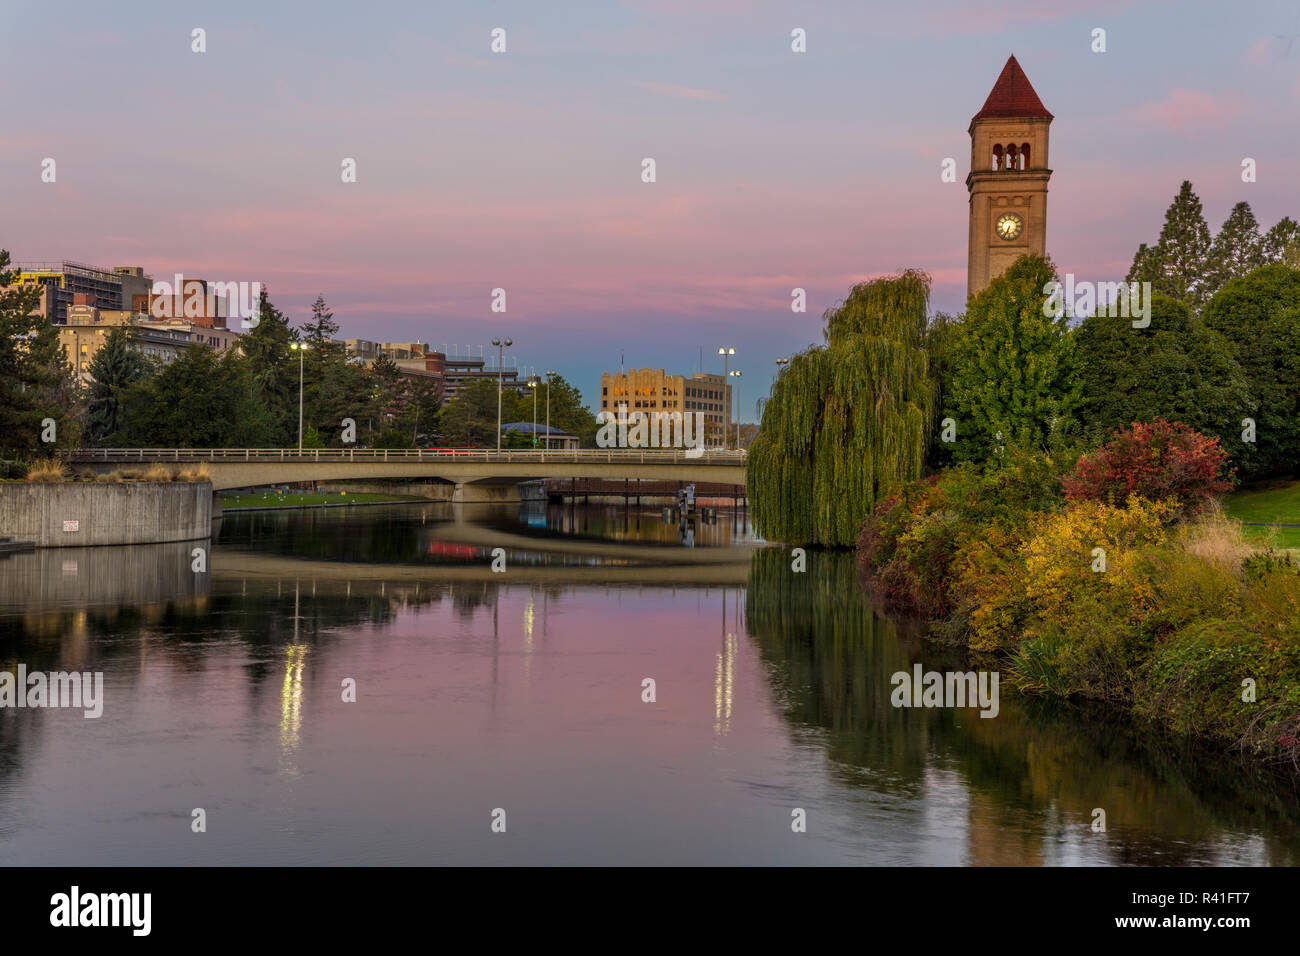 Clock tower reflects in the Spokane River at Riverfront Park in Spokane, Washington State, USA Stock Photo